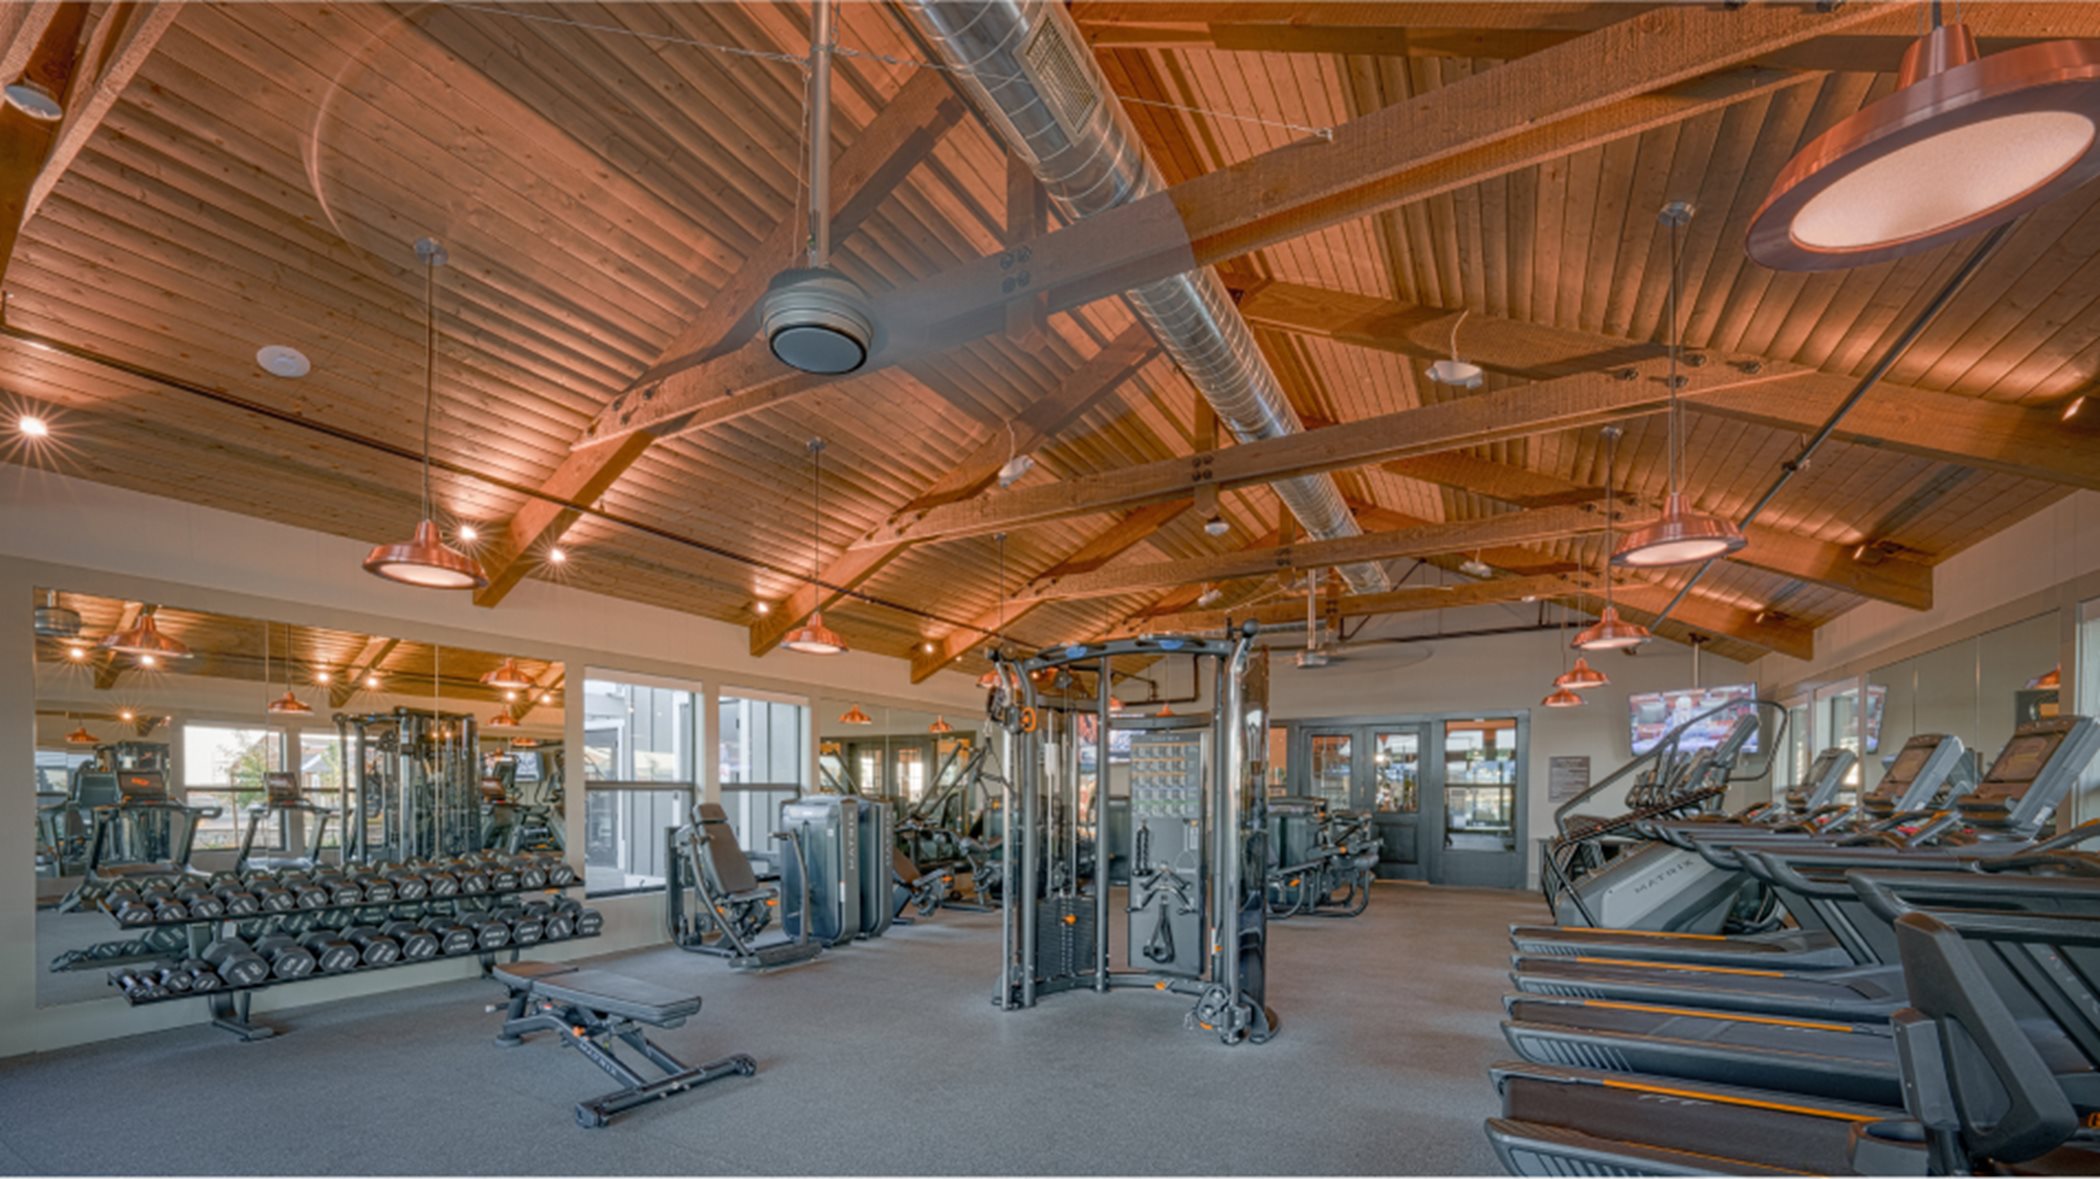 Fitness center interior with lots of machines